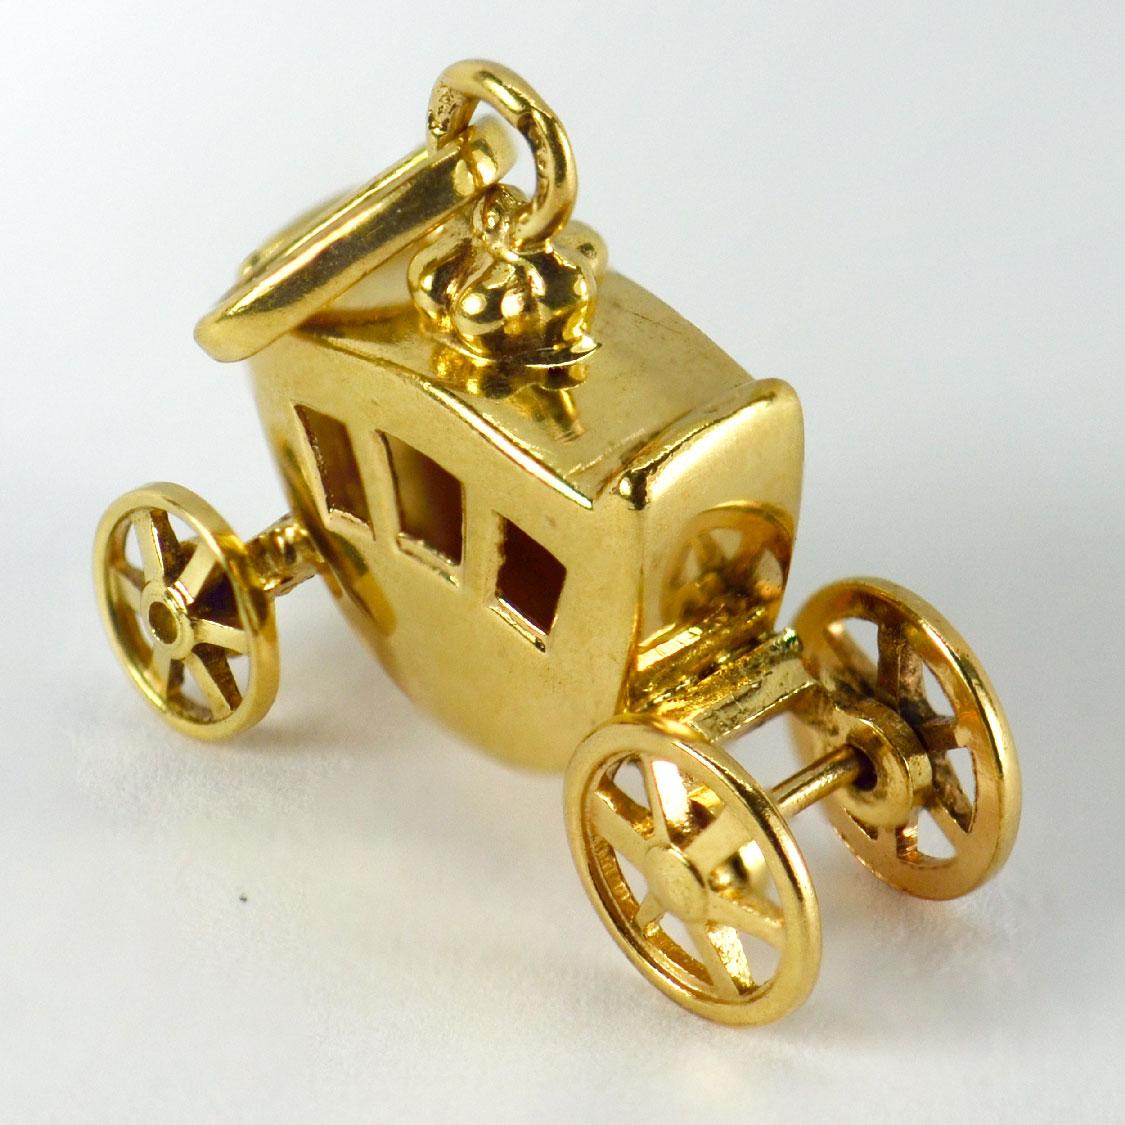 A French 18 karat (18K) yellow gold charm pendant designed as a carriage with moving wheels. Stamped with the eagles head for French manufacture and 18 karat gold with an unknown maker’s mark.

Dimensions: 1.6 x 1.8 x 0.65 cm (not including jump